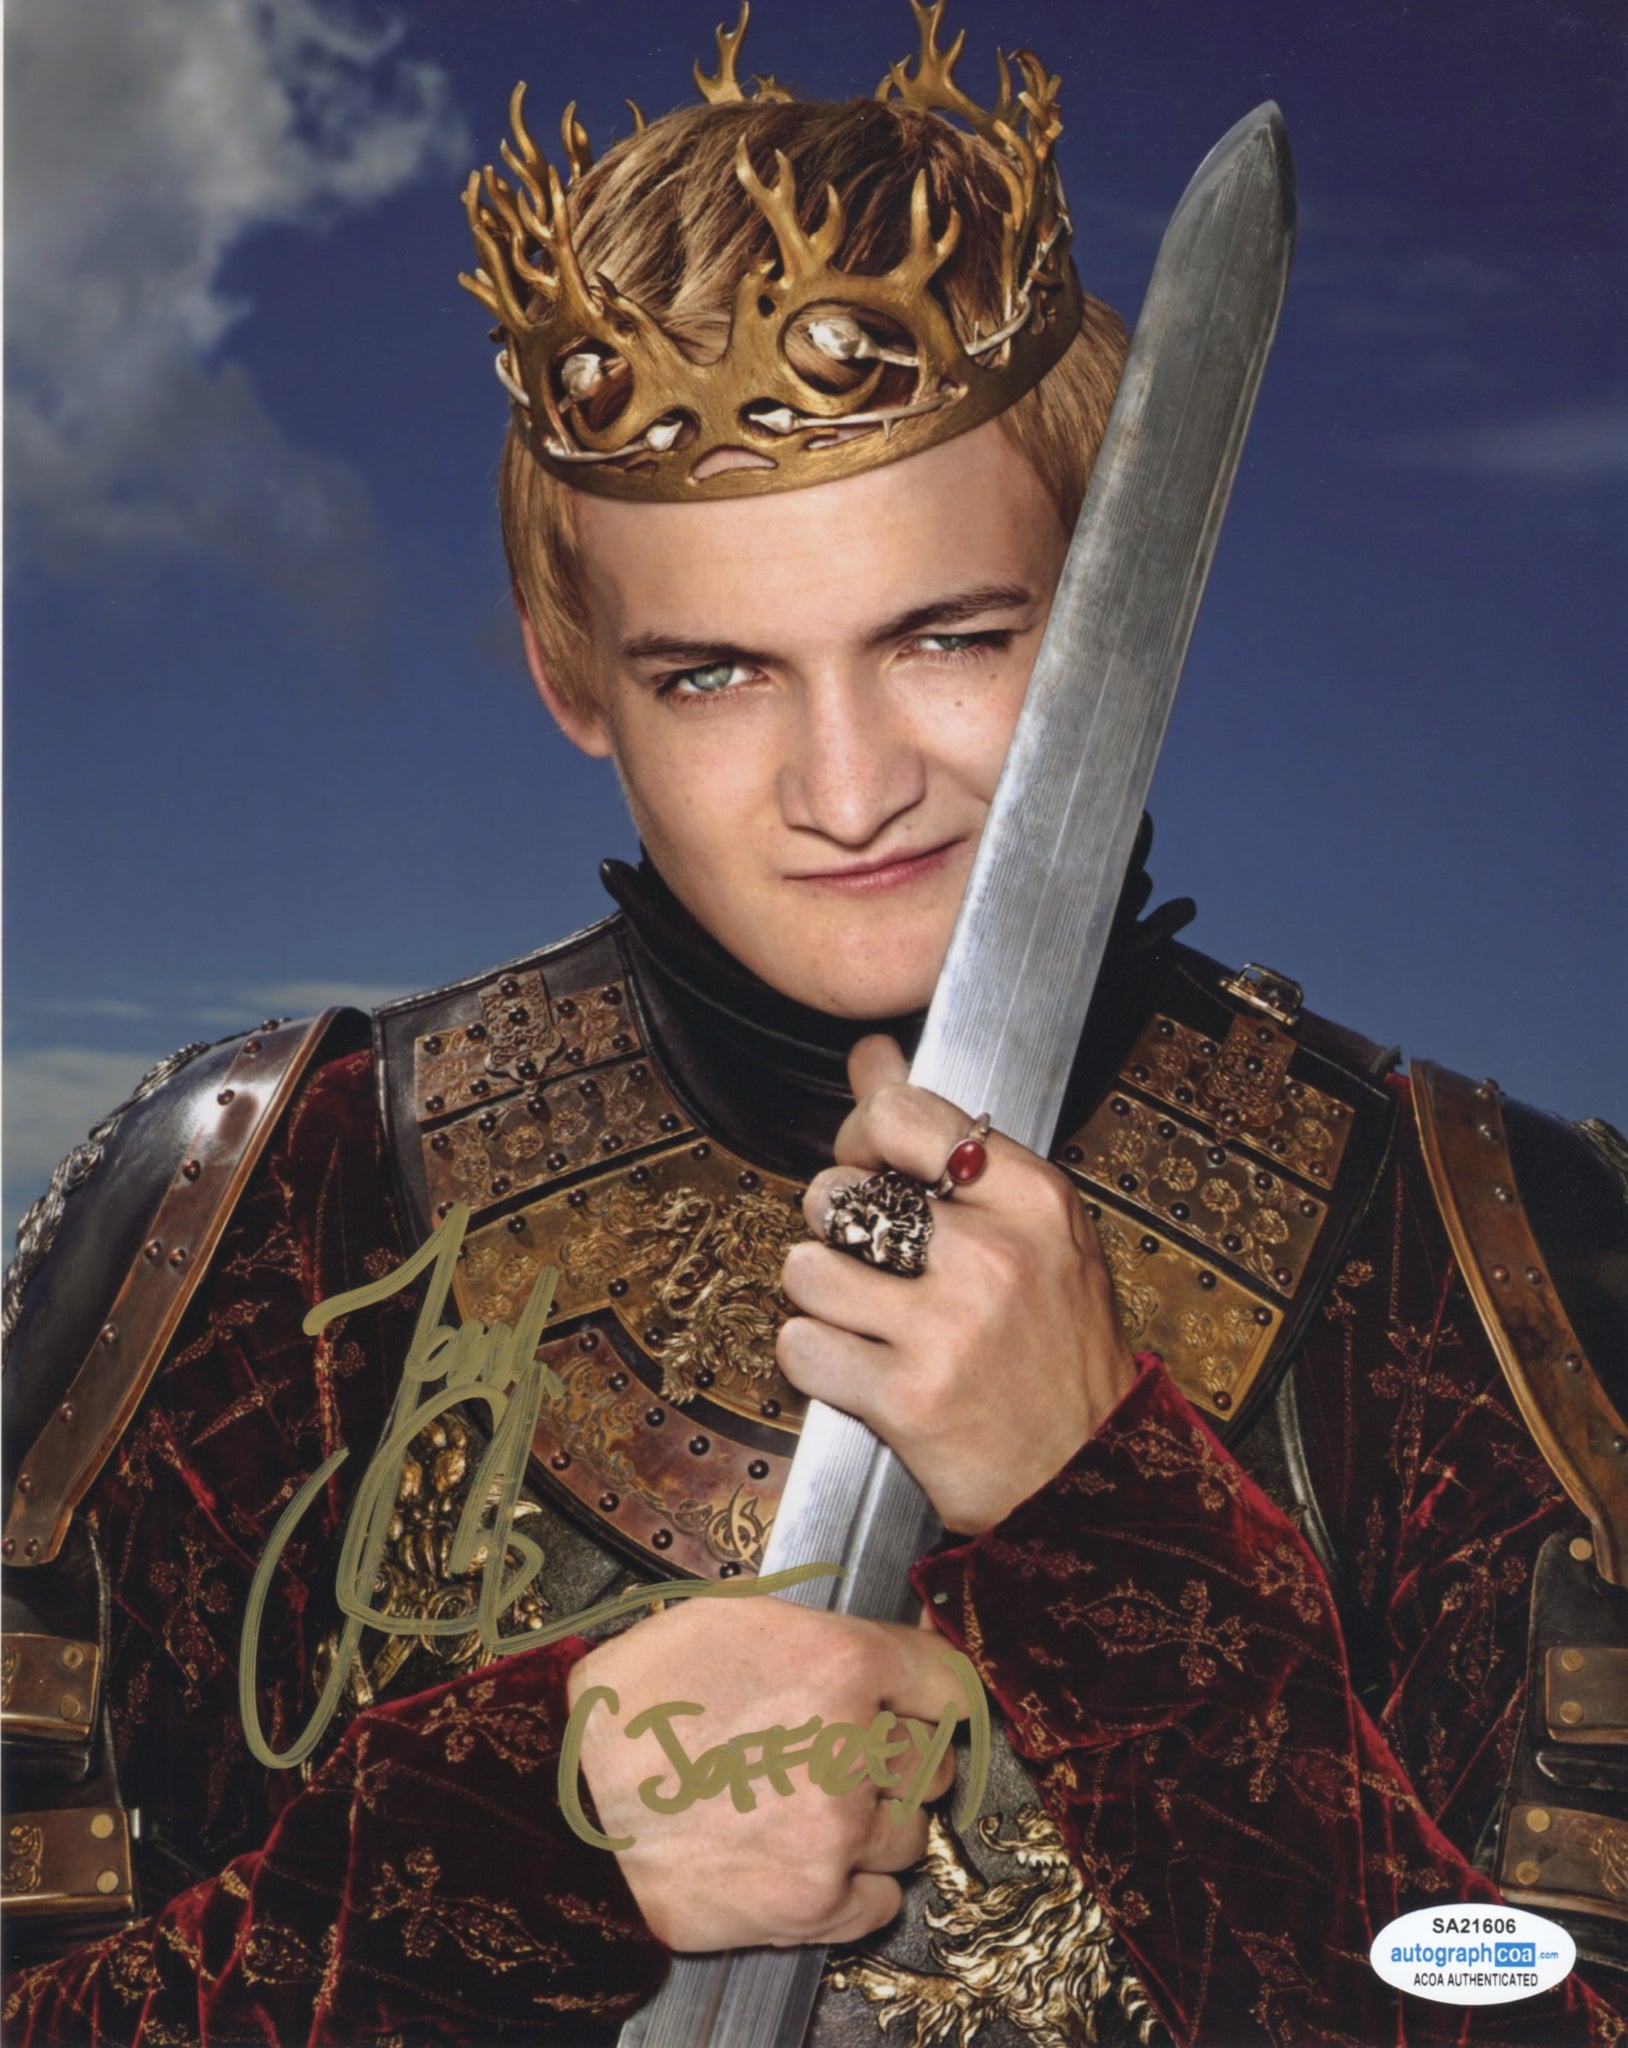 Jack Gleeson Game of Thrones Signed Autograph 8x10 Photo ACOA #4 - Outlaw Hobbies Authentic Autographs